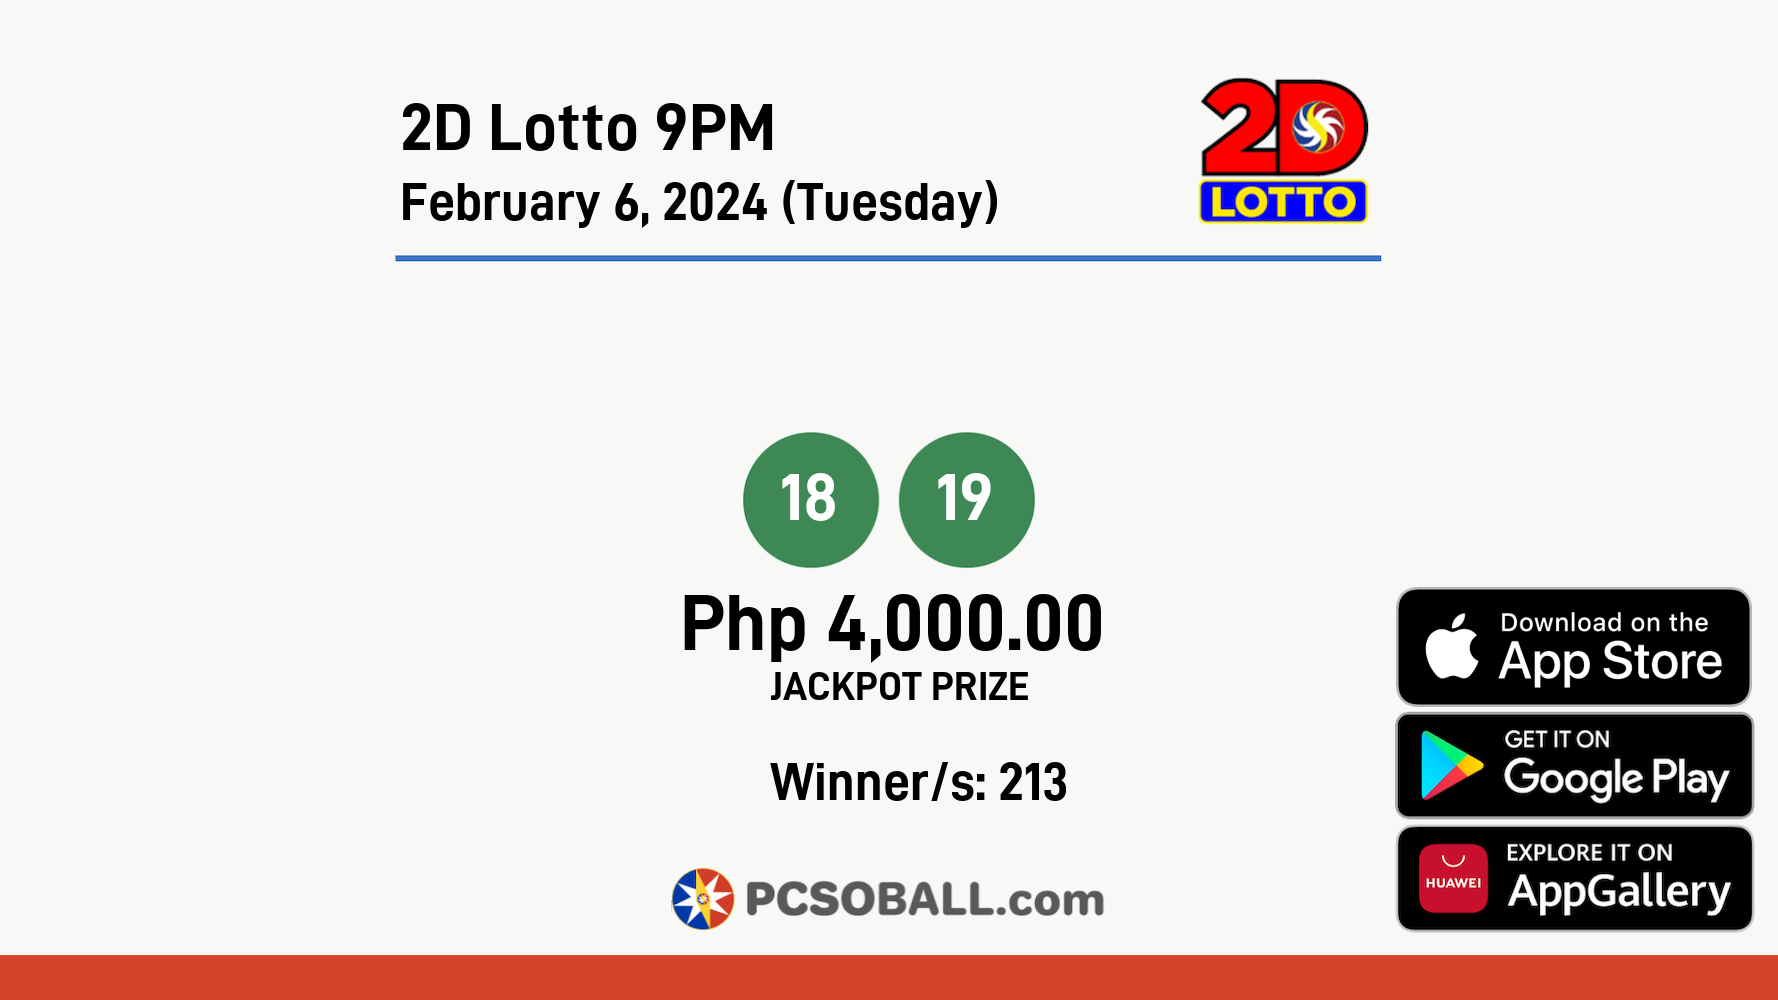 2D Lotto 9PM February 6, 2024 (Tuesday) Result